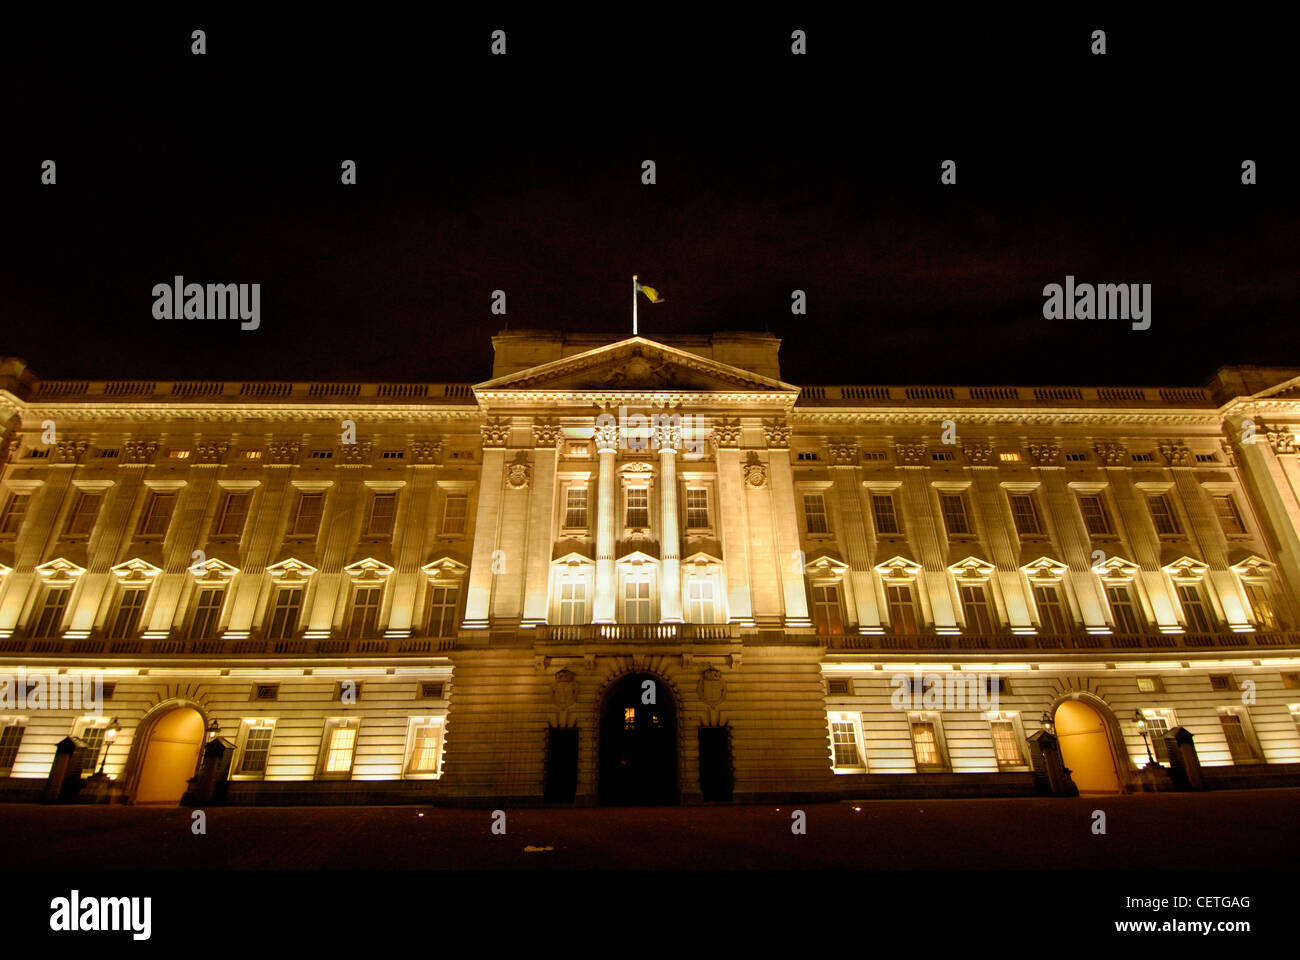 Buckingham Palace at night. Buckingham Palace has served as the official London residence of Britain's sovereigns since 1837, al Stock Photo